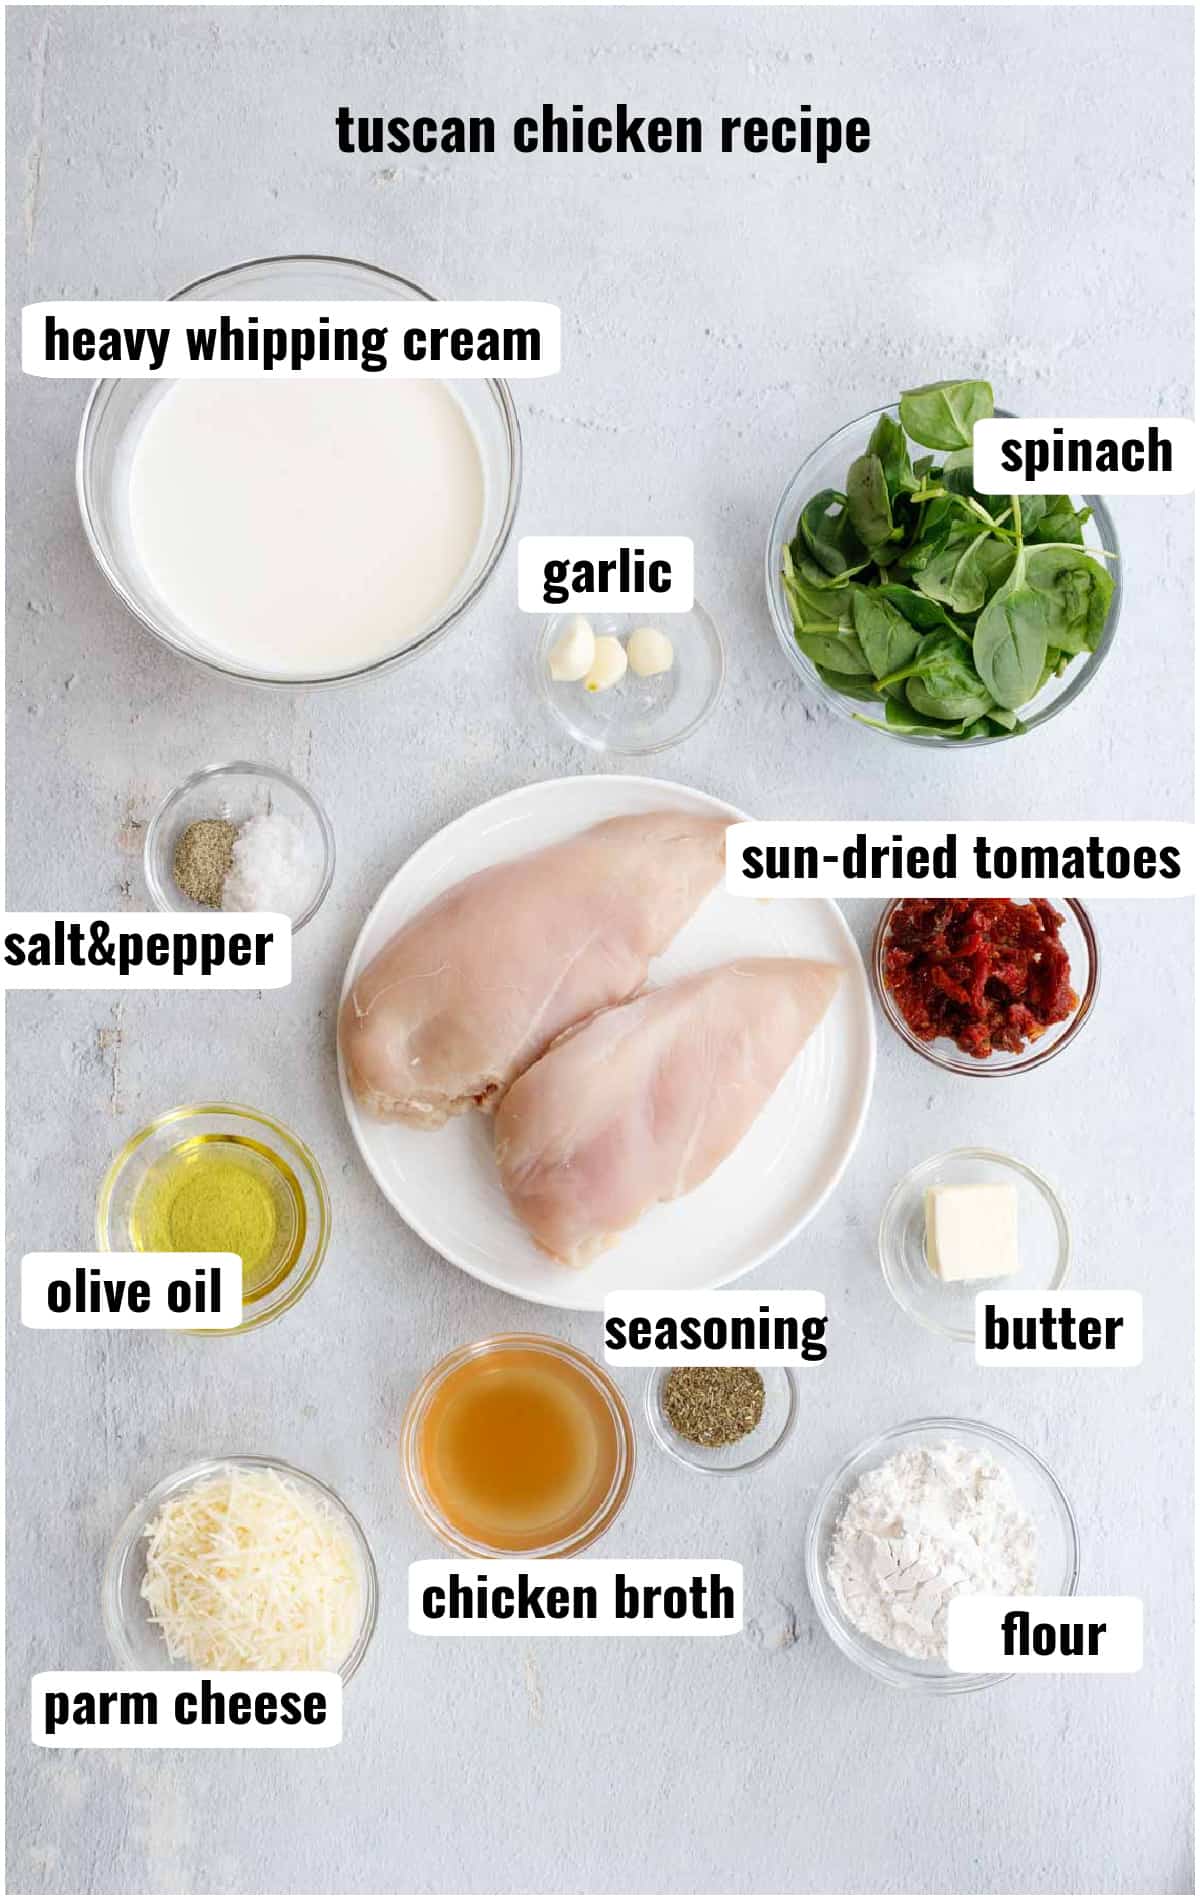 All the ingredients for this tuscan chicken recipe.